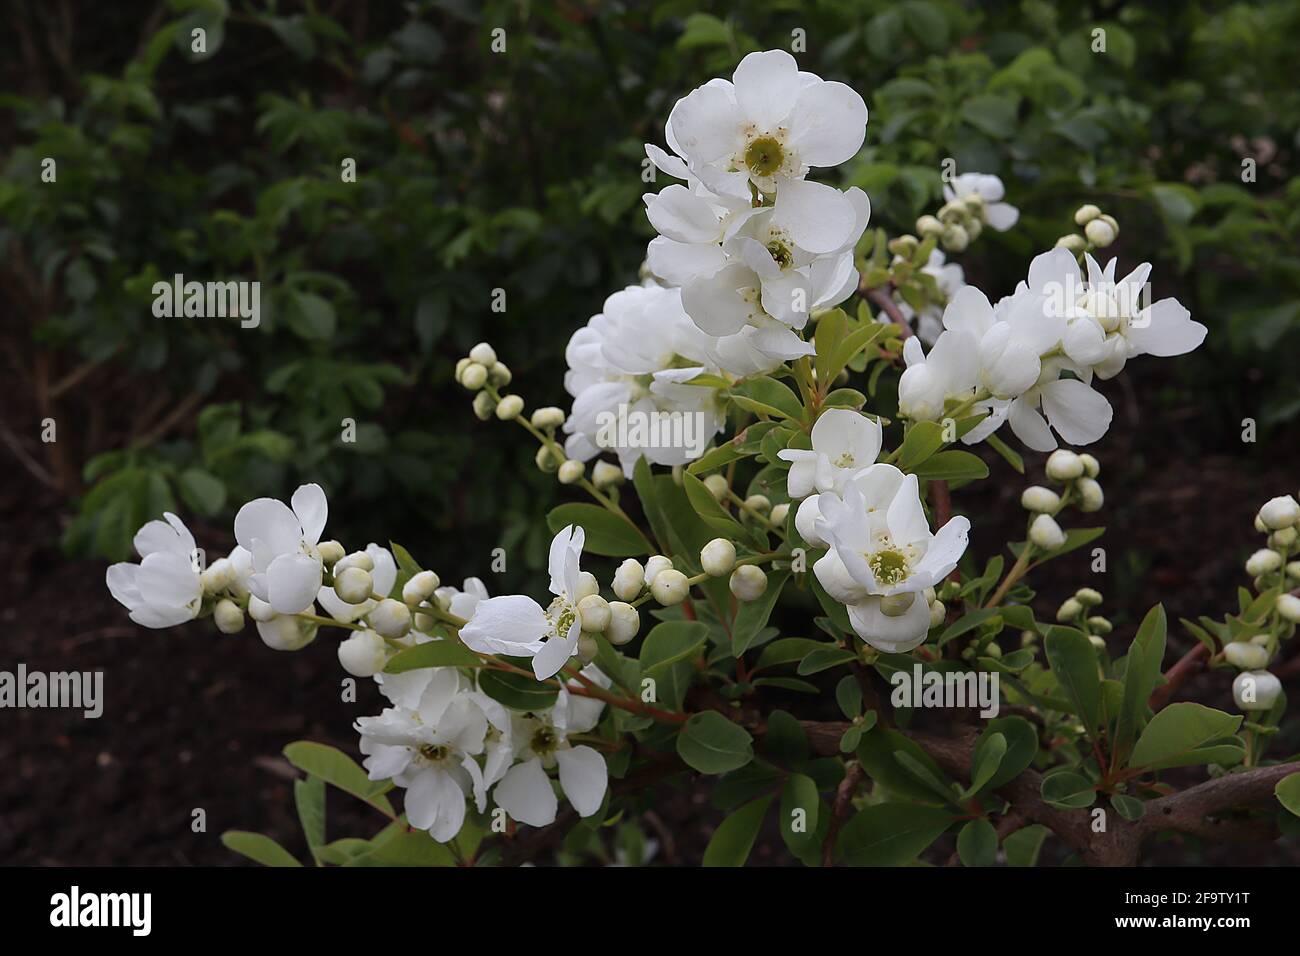 Exochorda x macrantha ‘The Bride’ pearlbush The Bride – masses of white cup-shaped flowers on arching branches,  April, England, UK Stock Photo